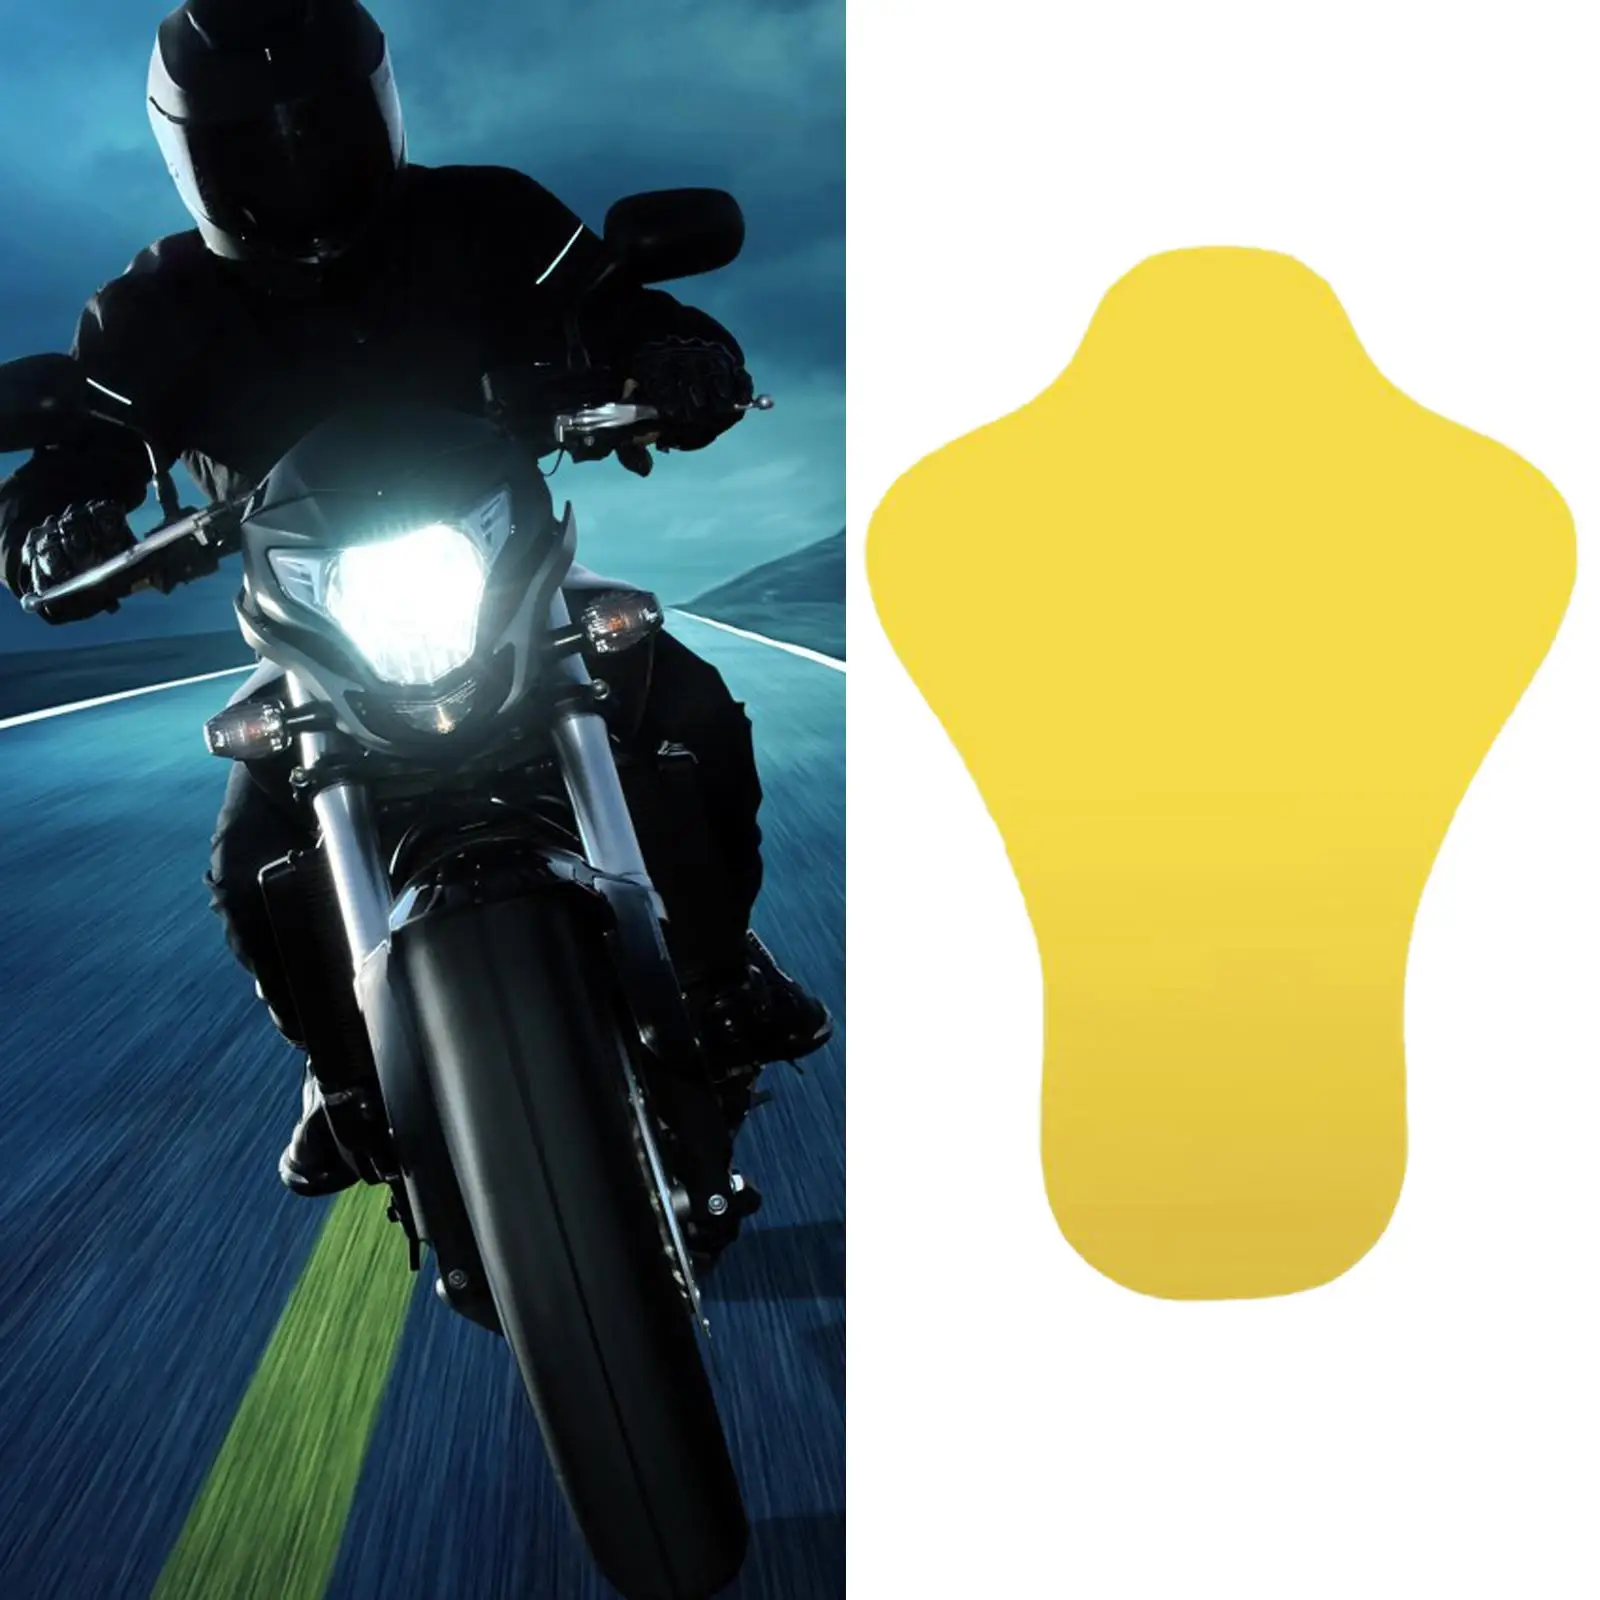   Motorcycle Jacket Insert Armor Protectors Set Motorcycle Protective